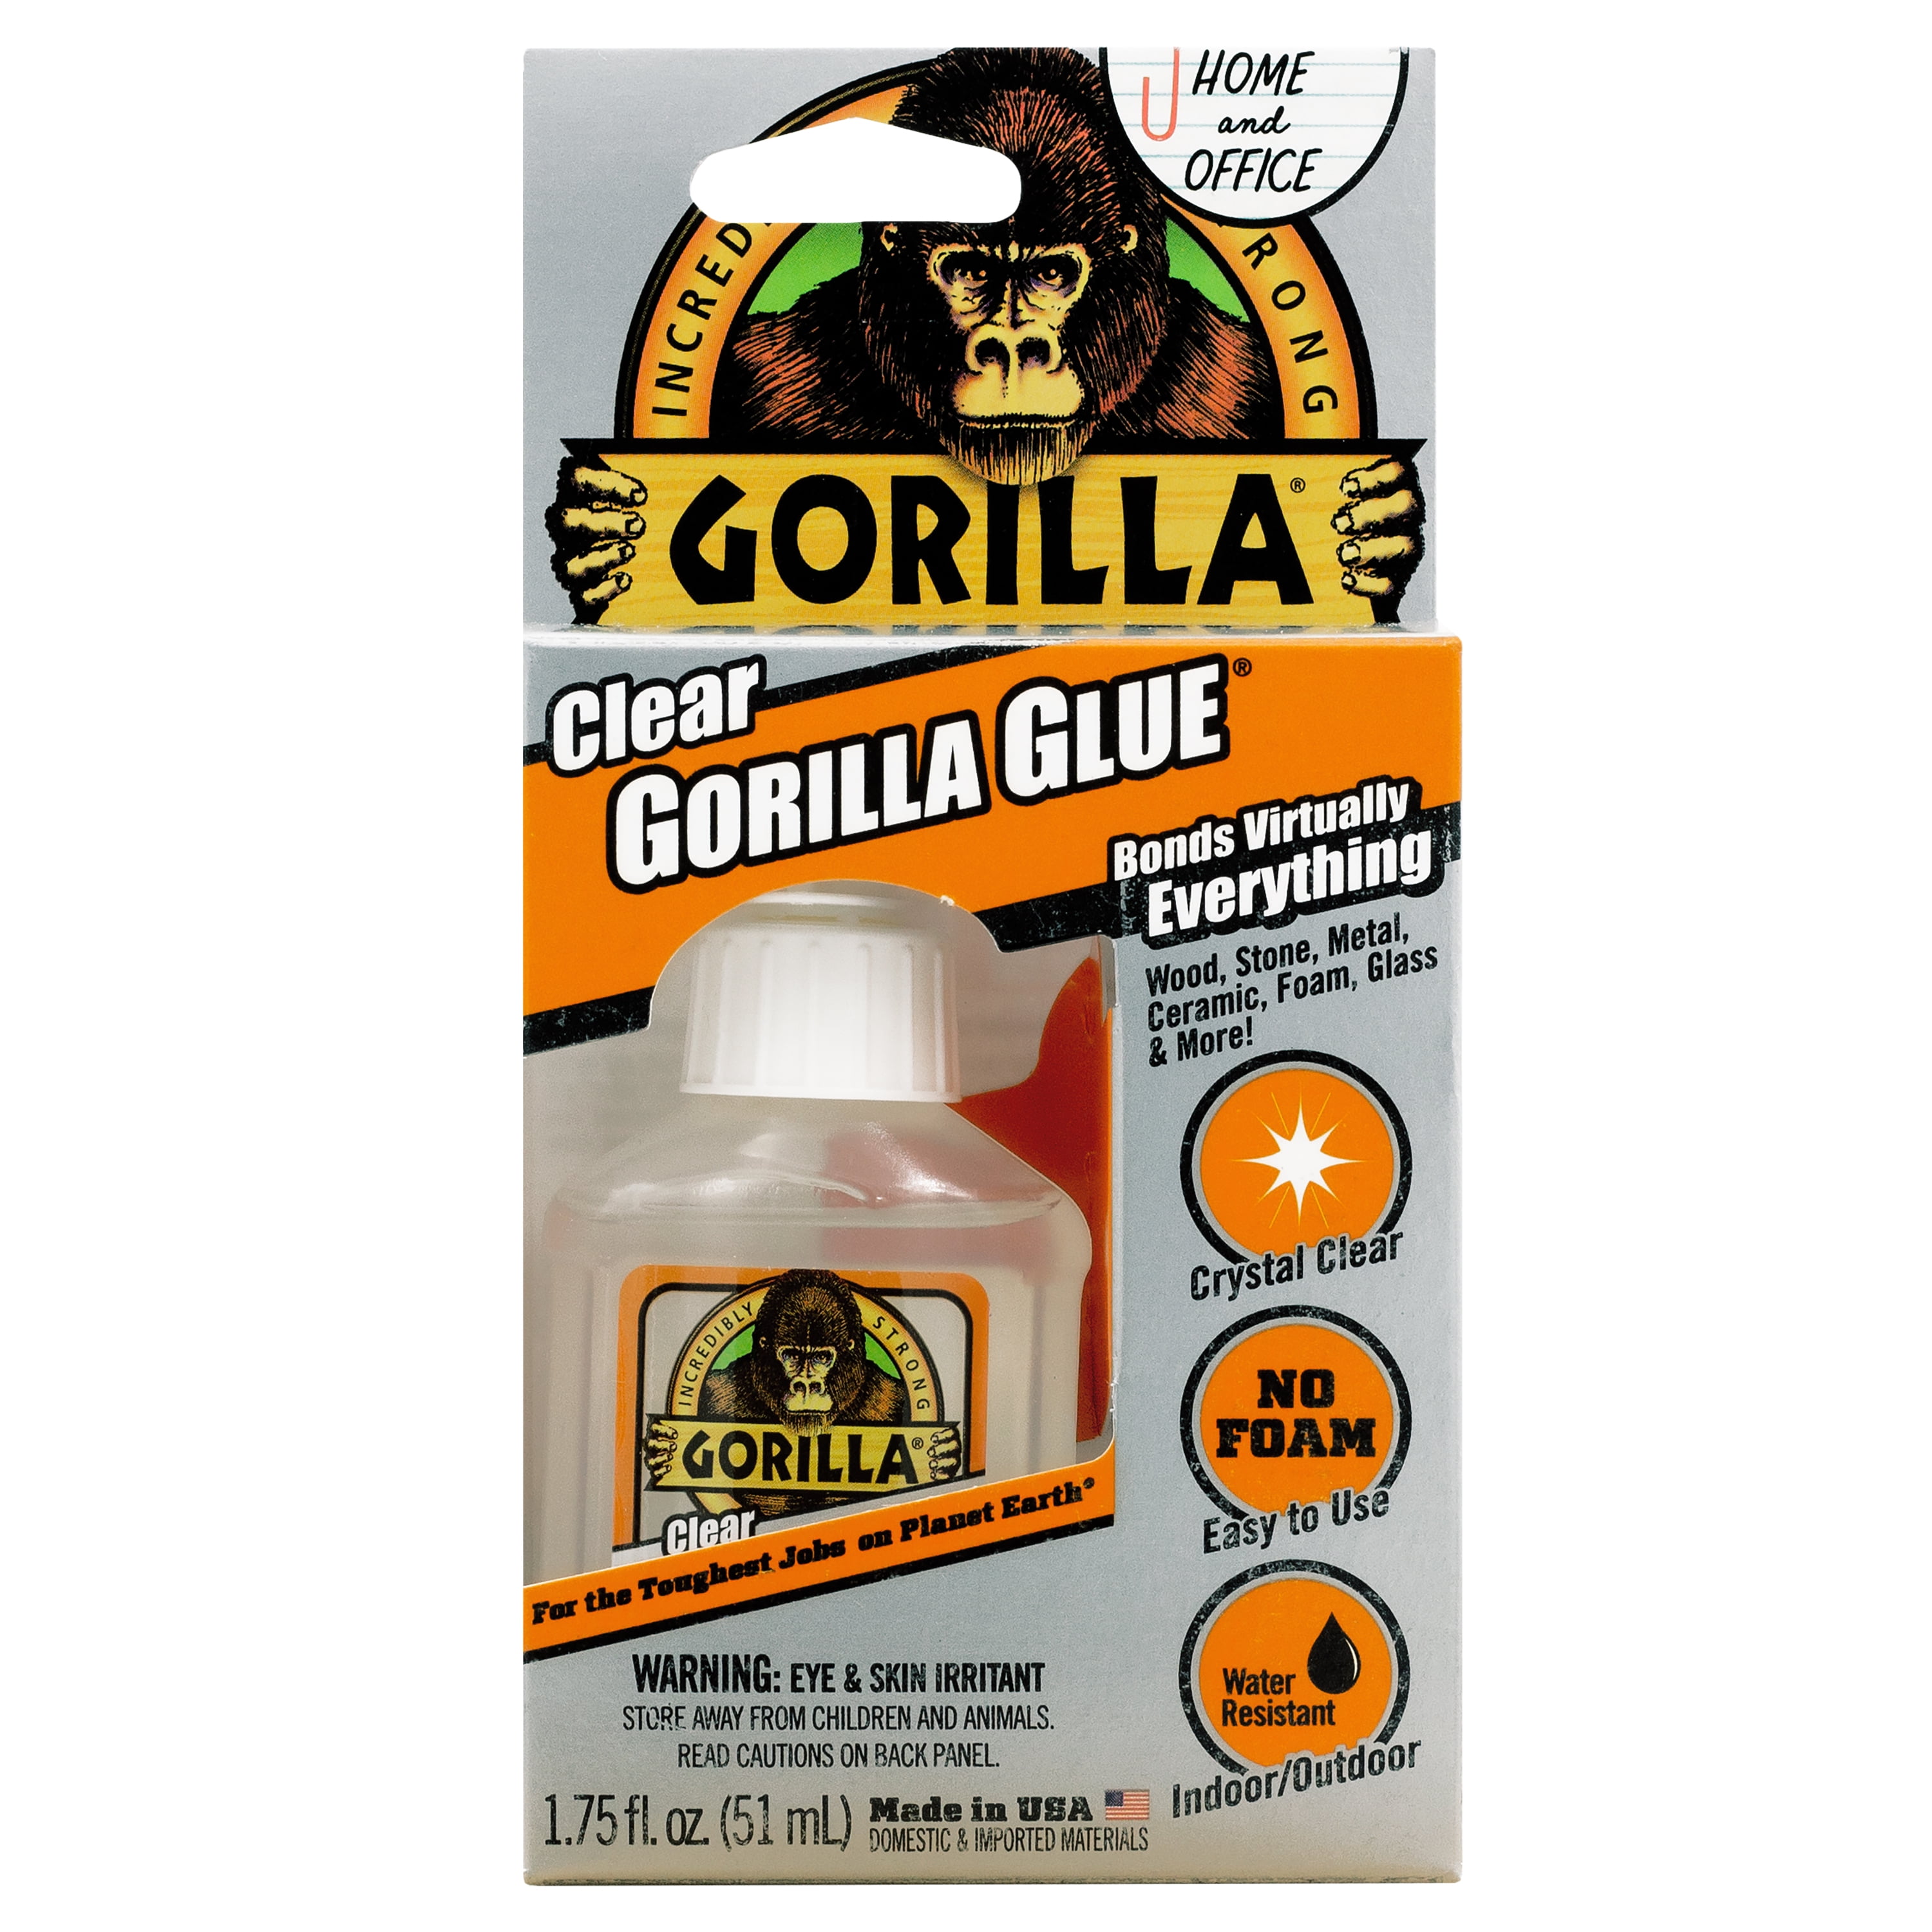 Original GORILLA GLUE Expanding Strong Indoor & Outdoor Adhesive 2 Ounce  Bottle All Purpose Bonds Virtually Everything WATERPROOF 50002 